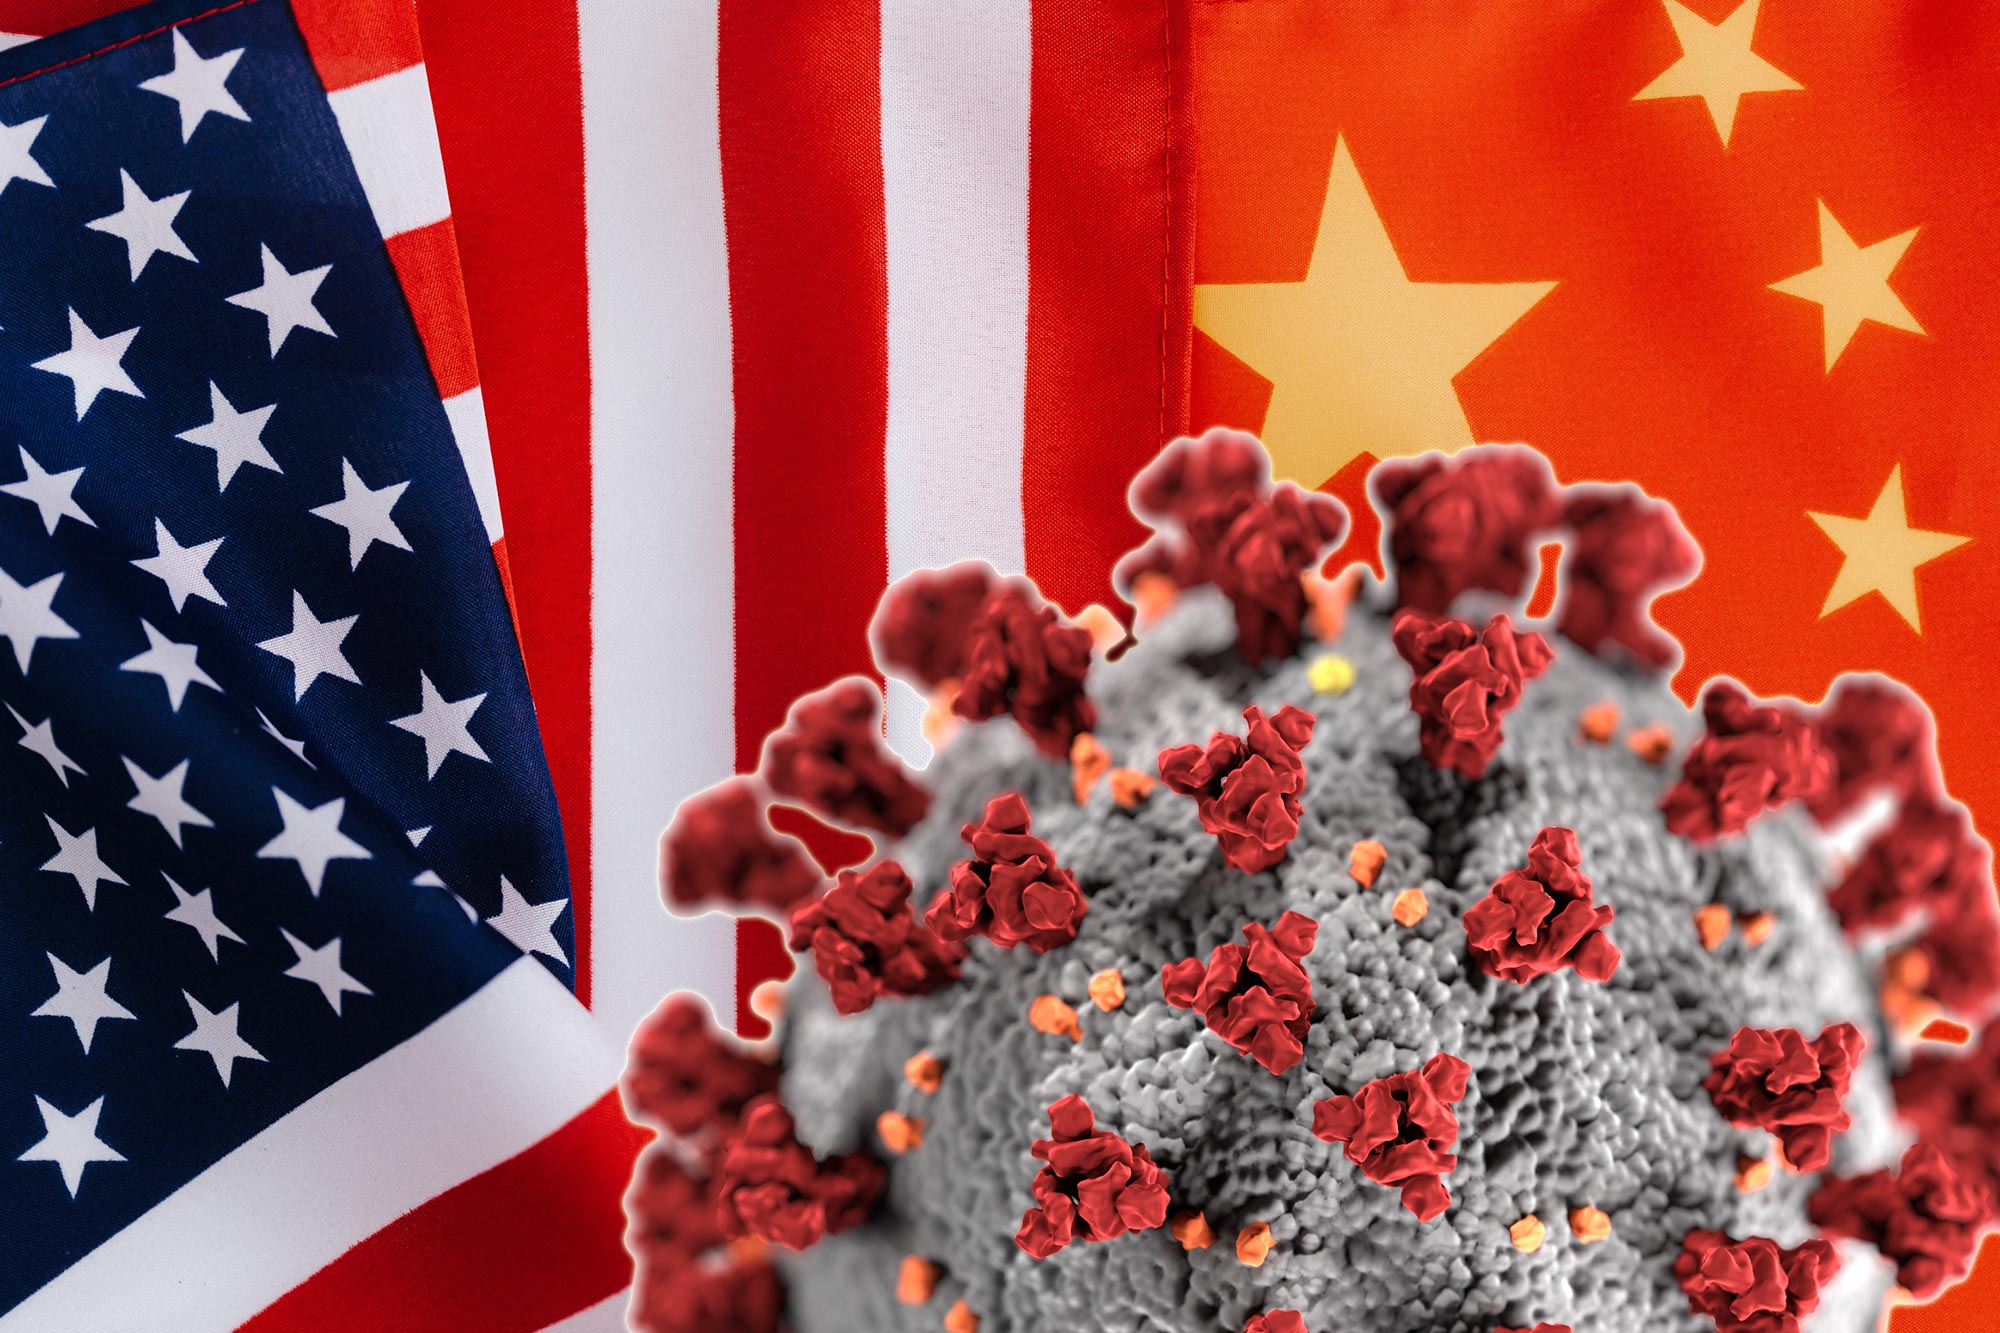 Despite  political tensions U.S. & Chinese scientists leading efforts on COVID-19